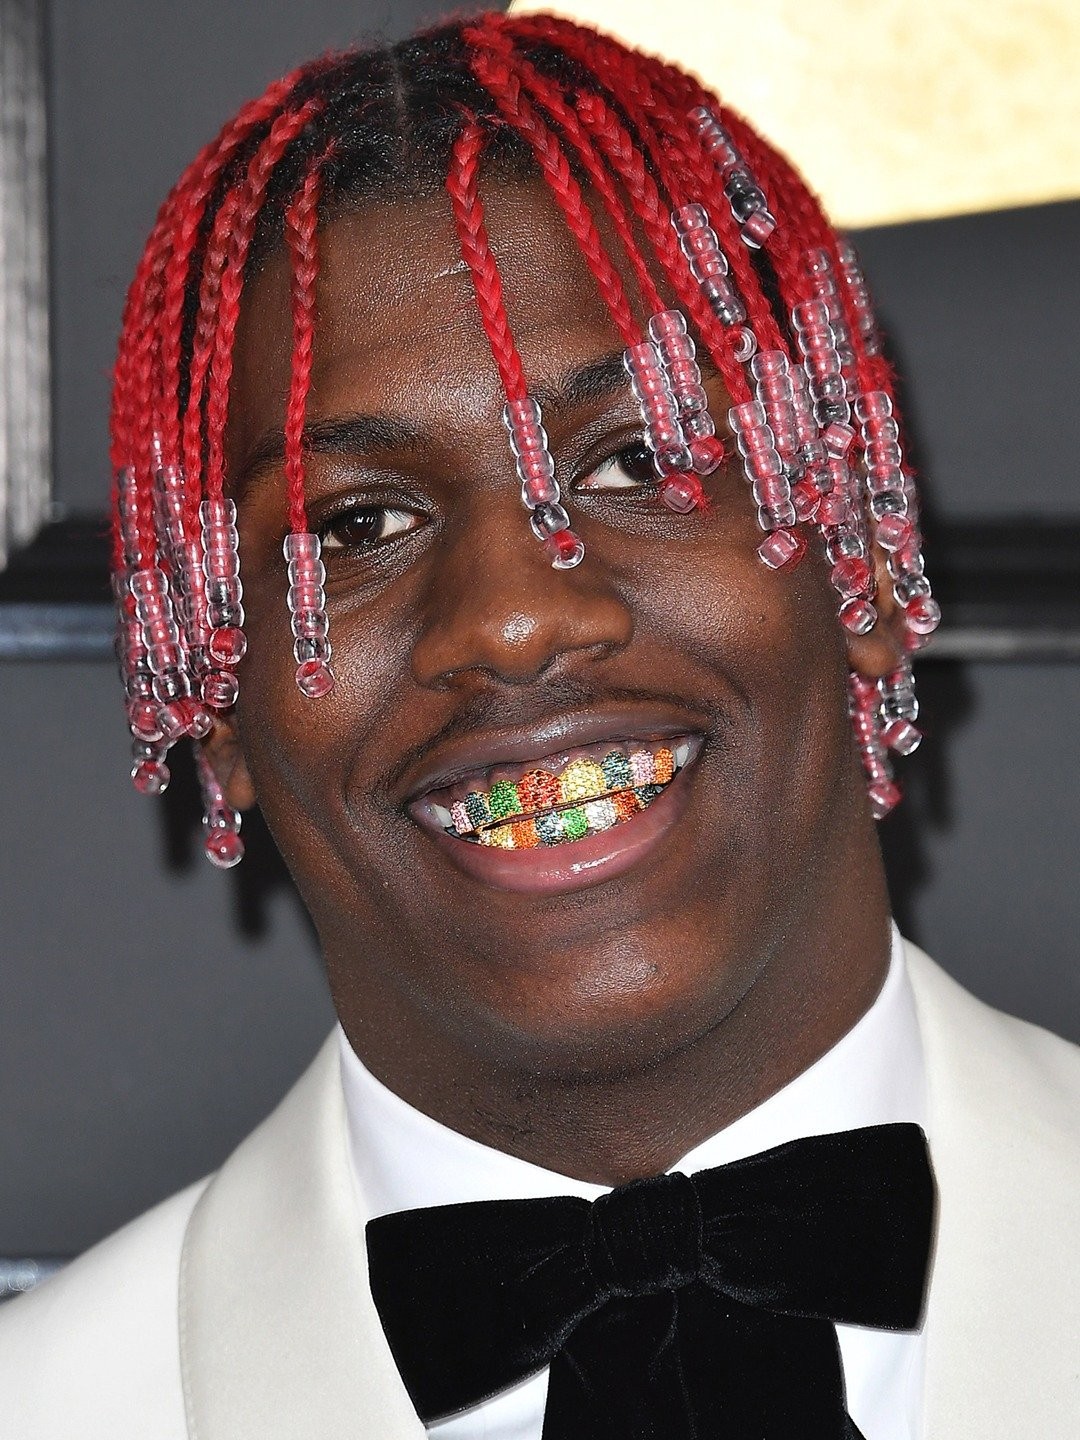 Lil Yachty being still alive